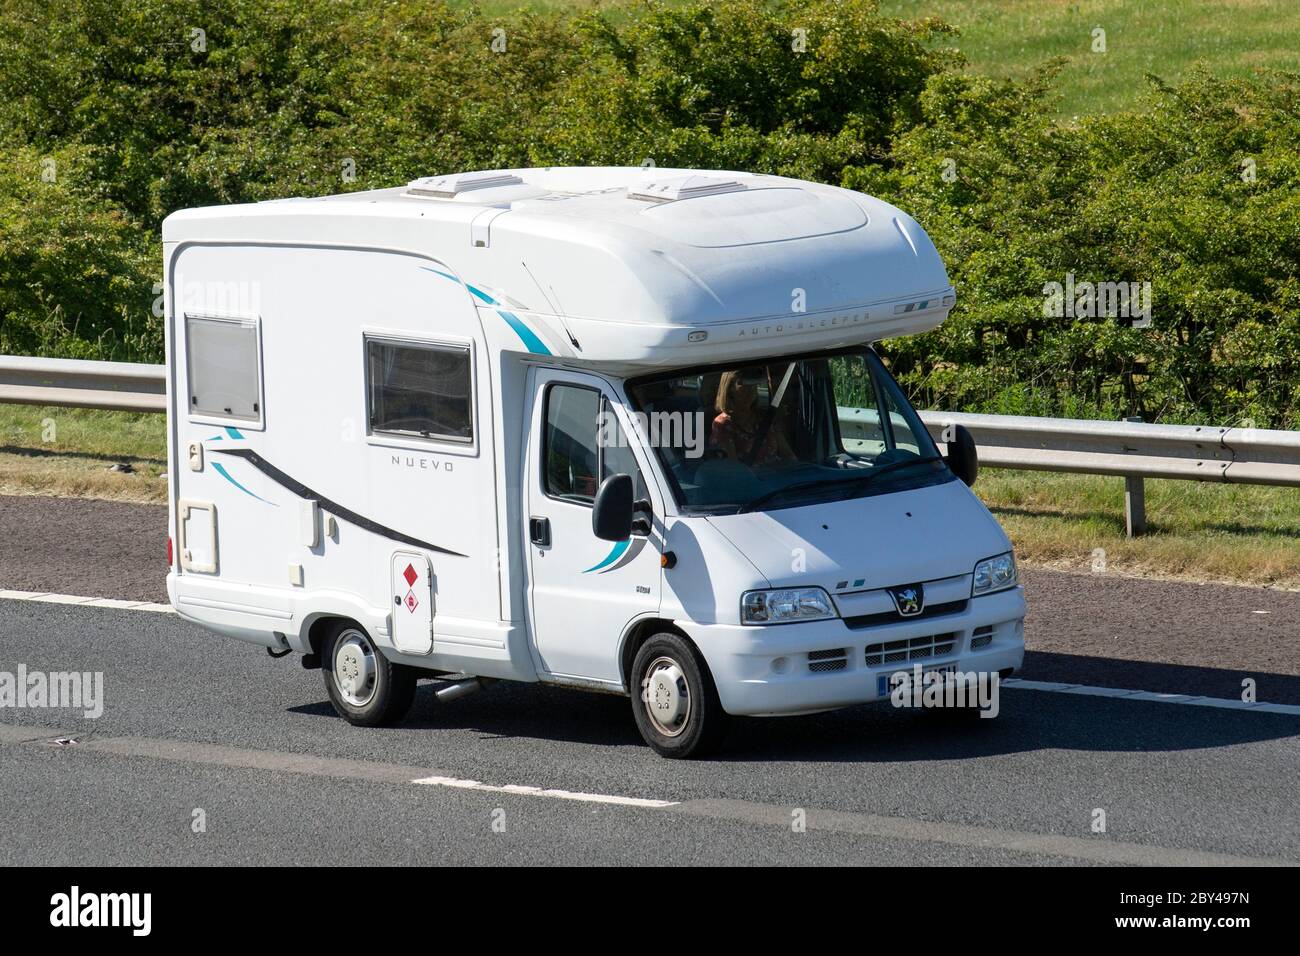 Peugeot Boxer Camper High Resolution Stock Photography and Images - Alamy